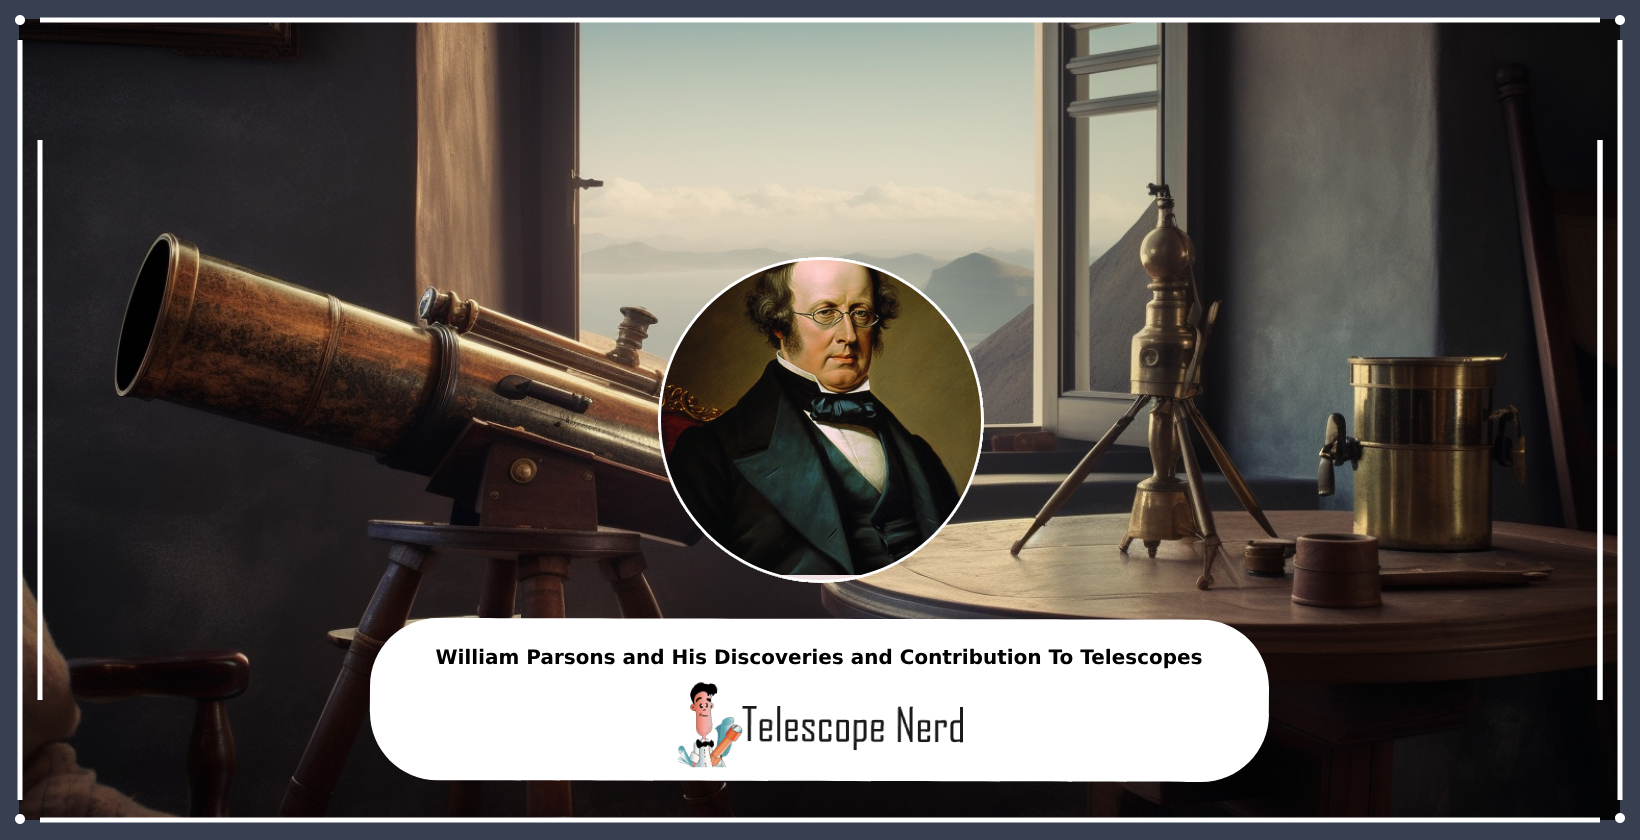 William Parsons, 3rd Earl of Rosse astronomer and his contributions